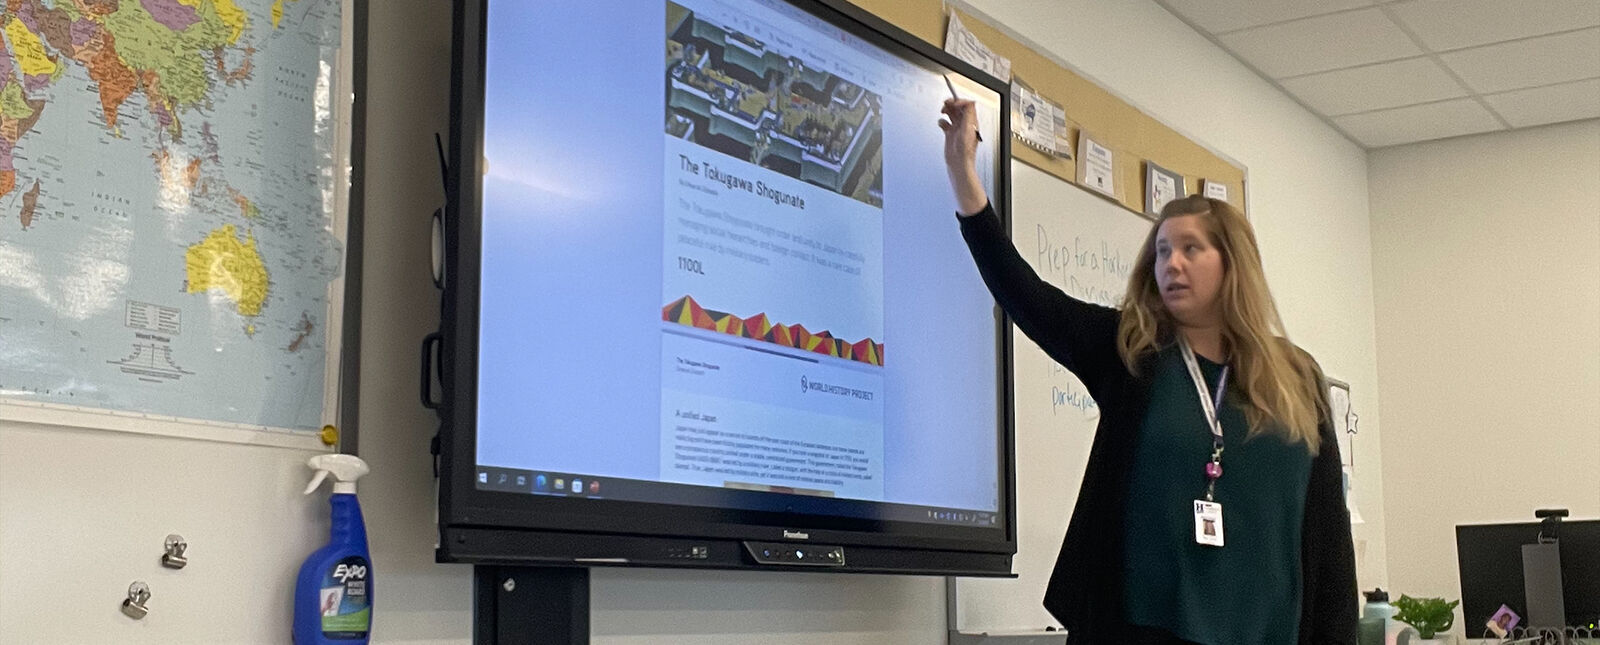 A female student teacher points to a smartboard in a classroom